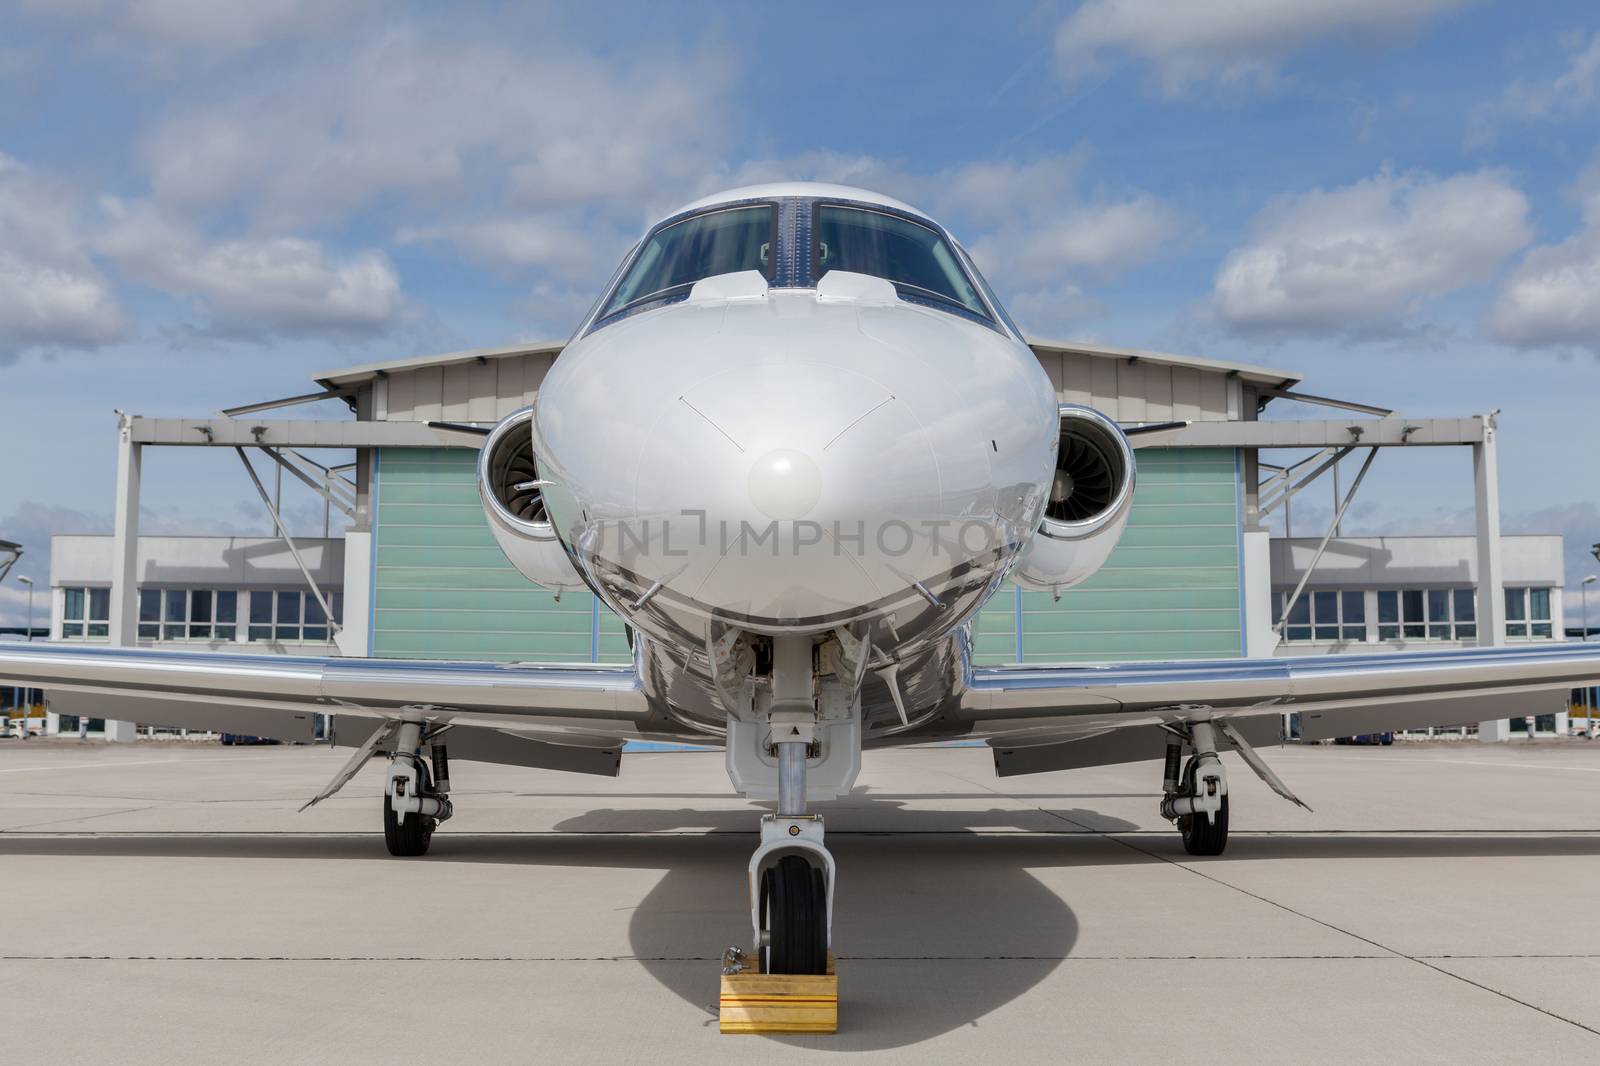 Aircraft learjet Plane in front of the Airport with cloudy sky and sun